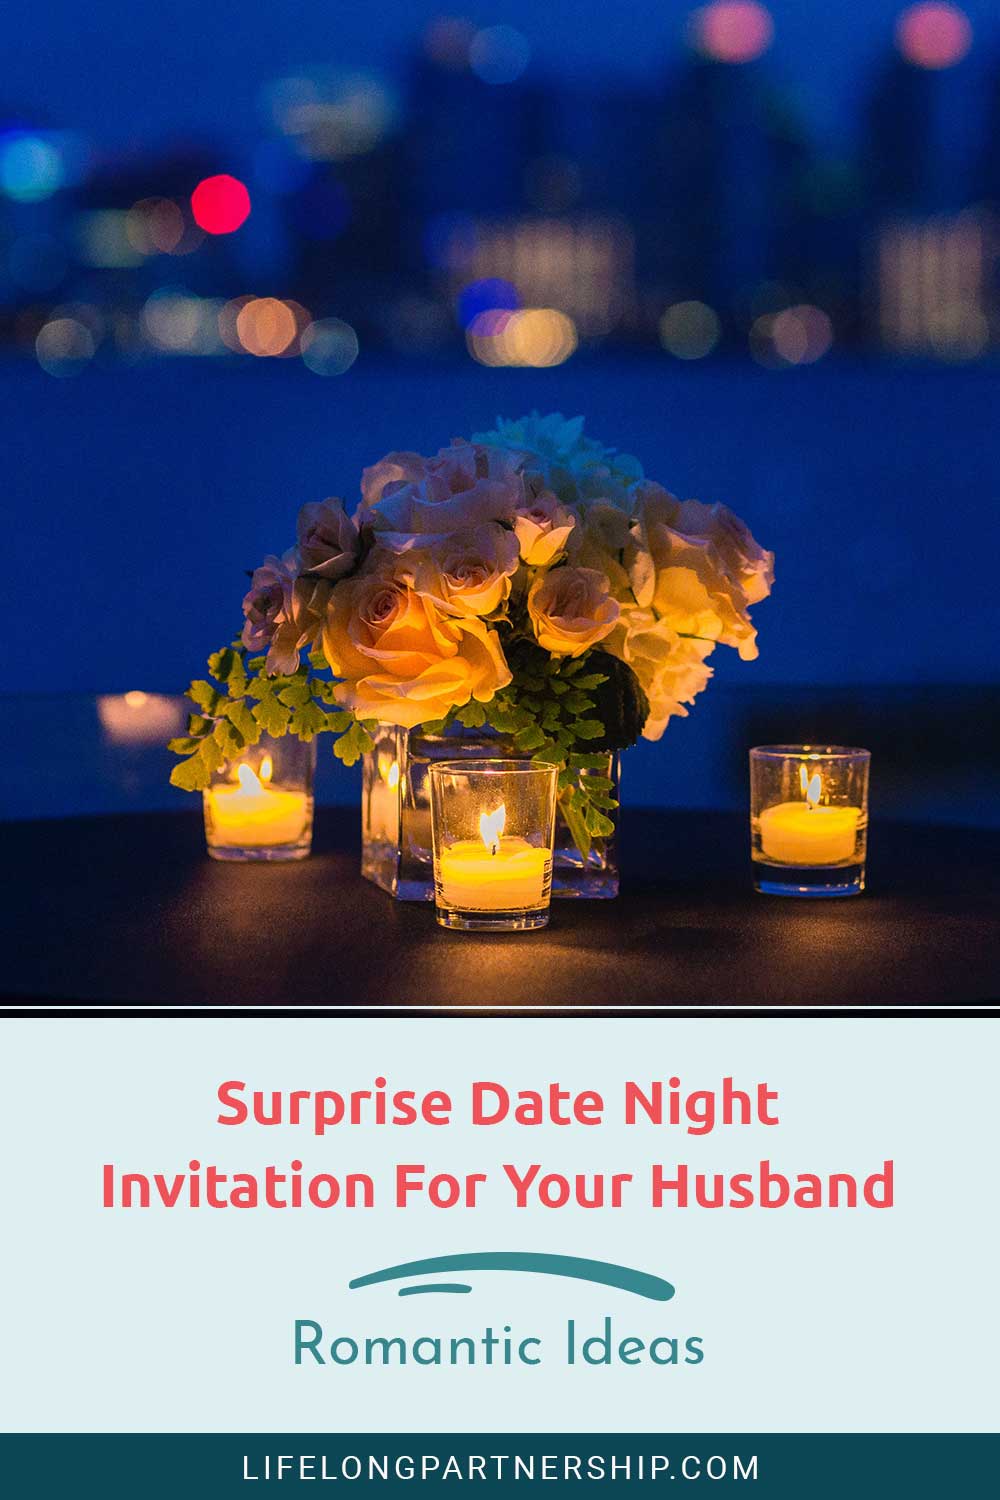 Bouquet of flower and candles on a table in the evening - Surprise Date Night Invitation For Your Husband